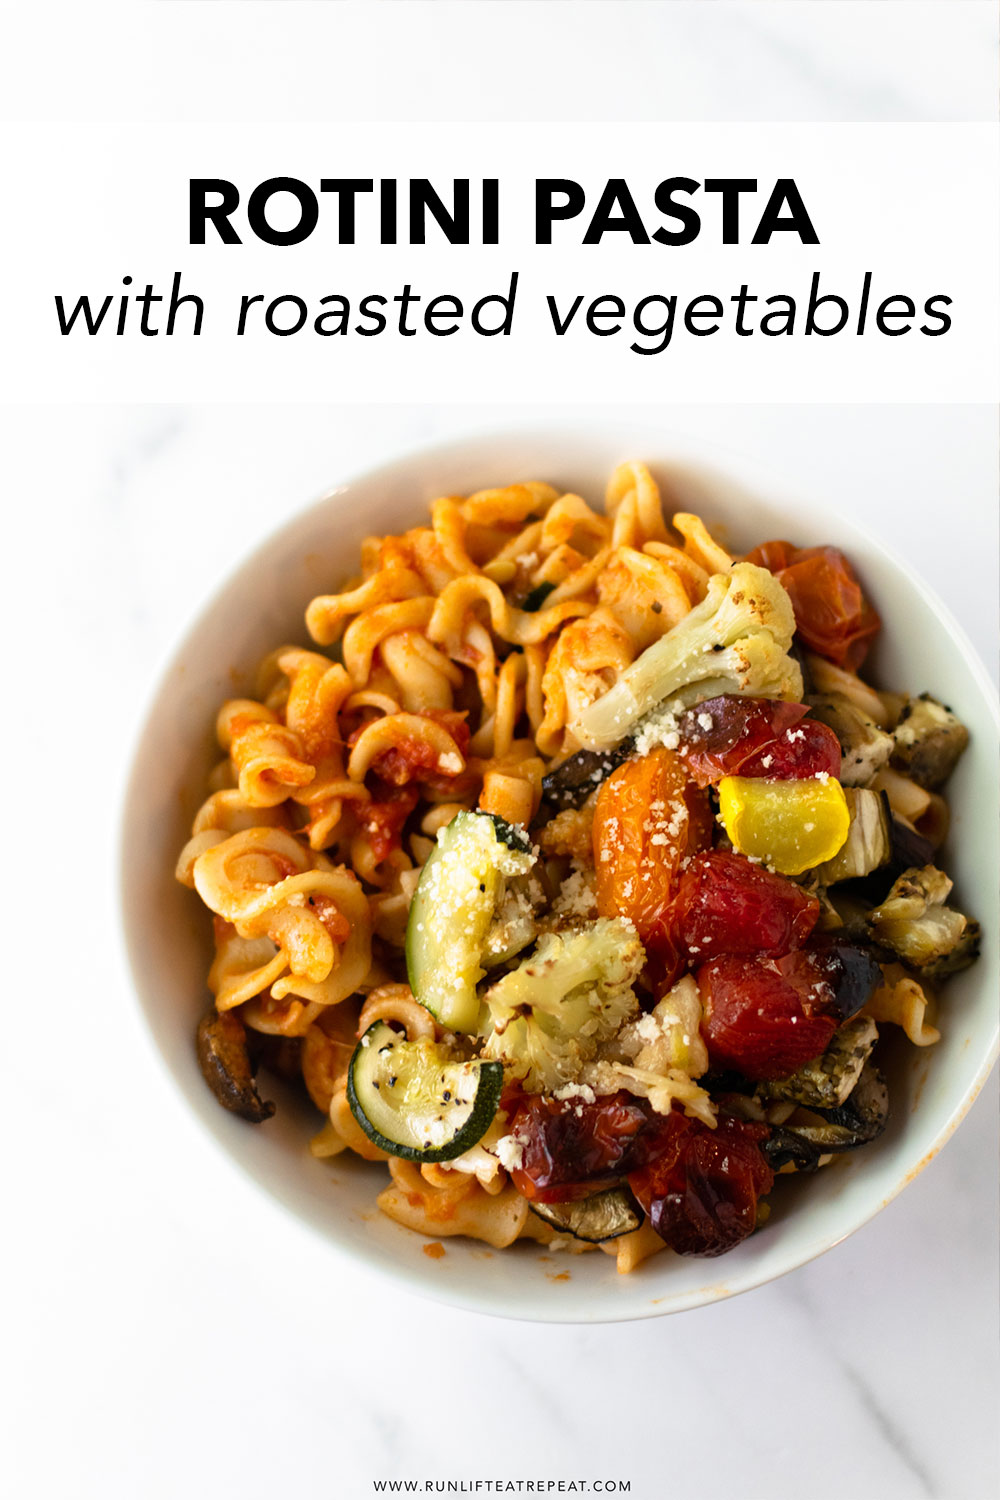 Add this cheesy rotini pasta with roasted vegetables to your dinner menu! Combined together in a pot— rotini pasta, melted cheese, rich marinara sauce, and roasted vegetables. It adds a twist to a classic pasta dish that the entire family will love!